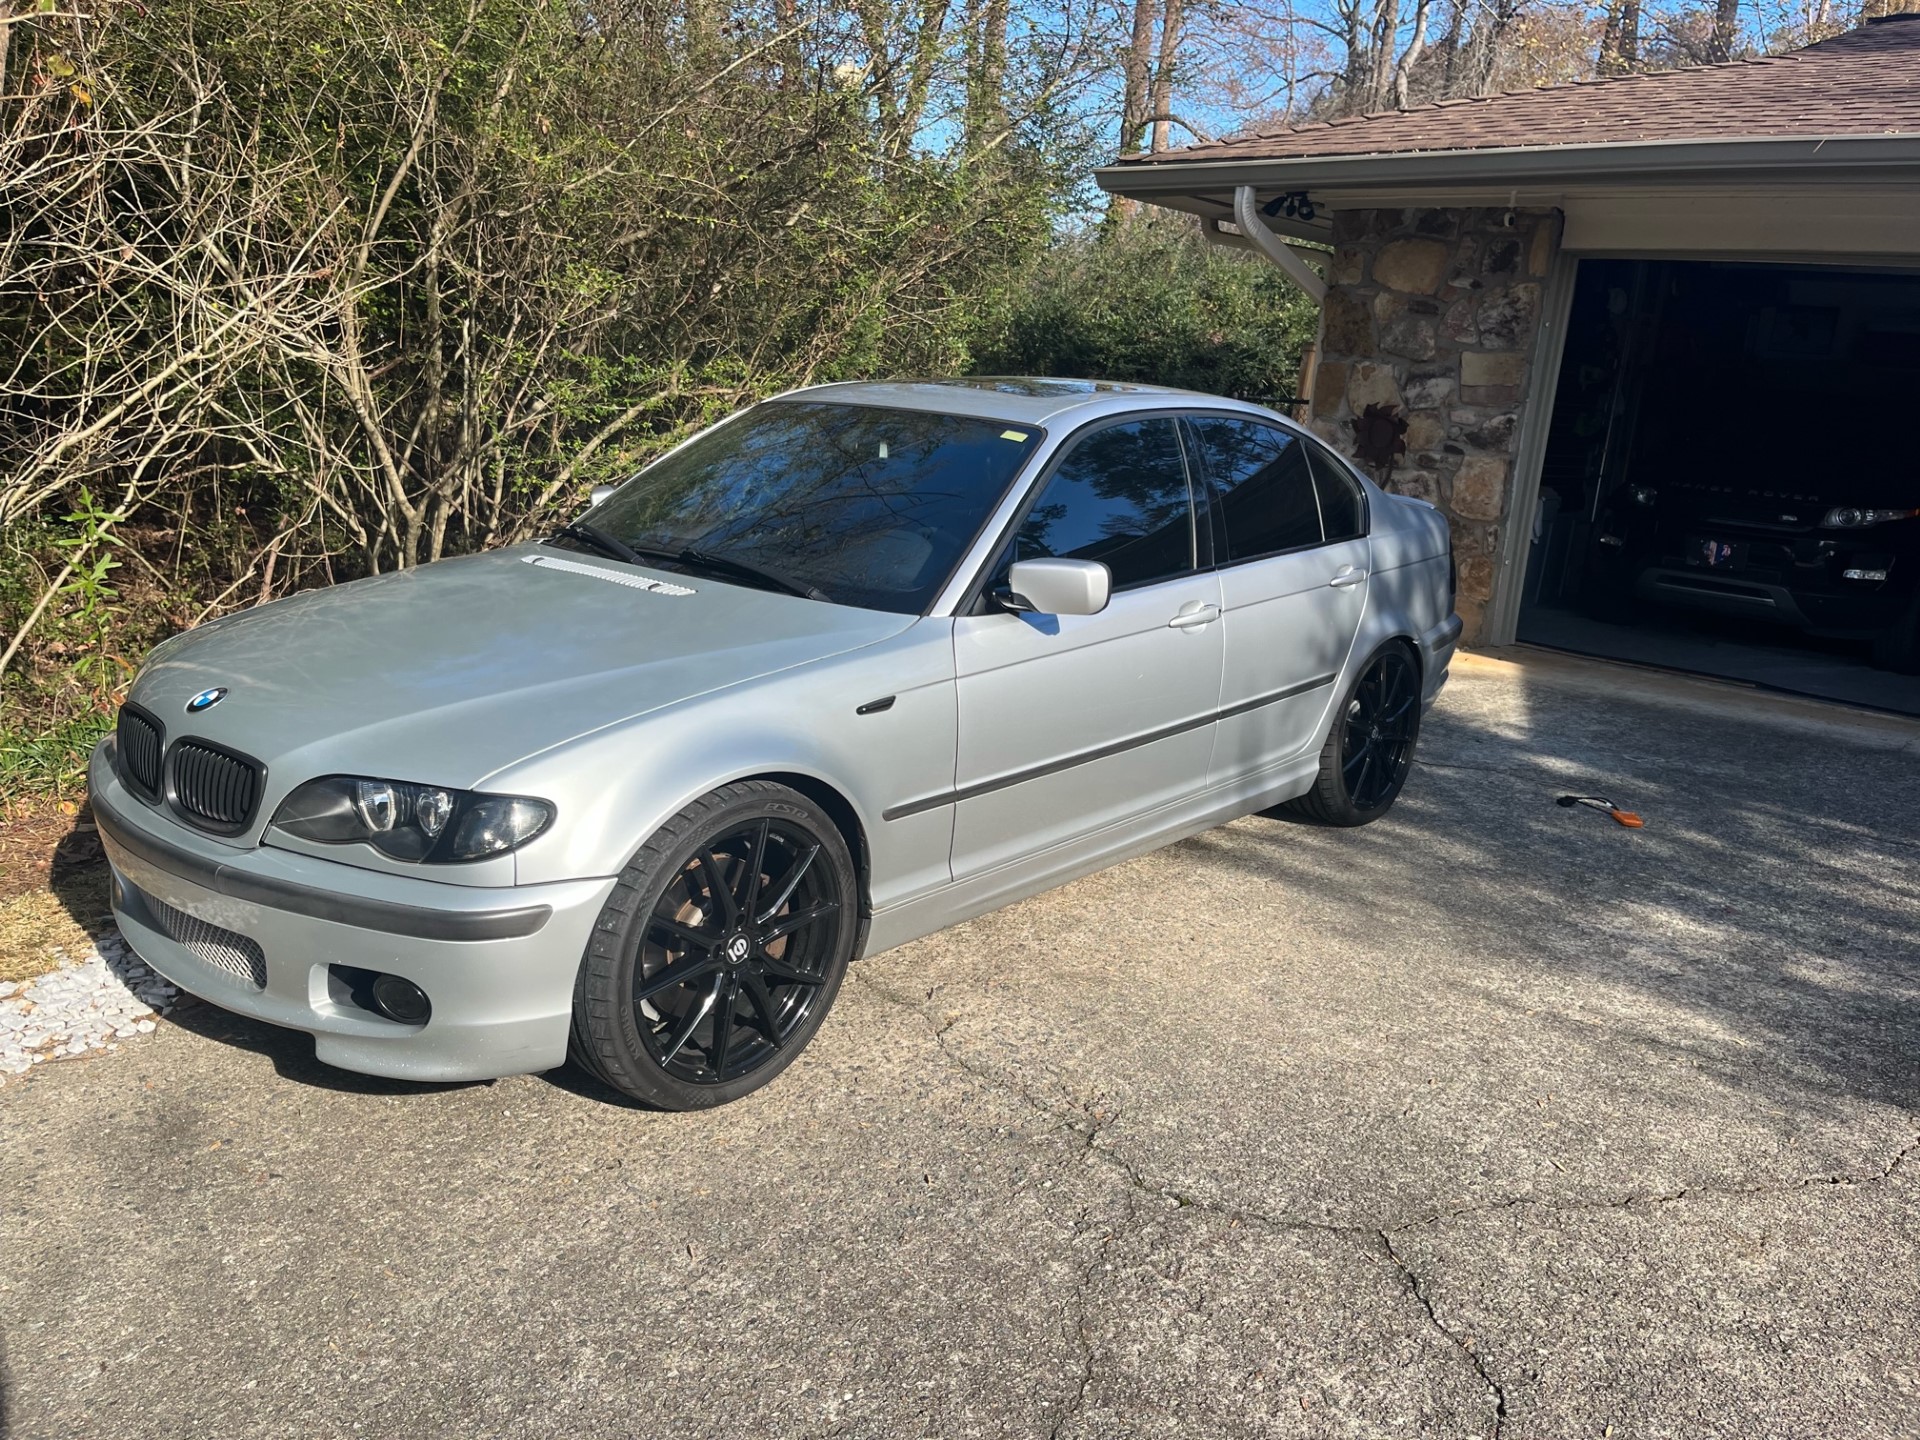 Used 2004 BMW 330i for Sale Right Now - Autotrader